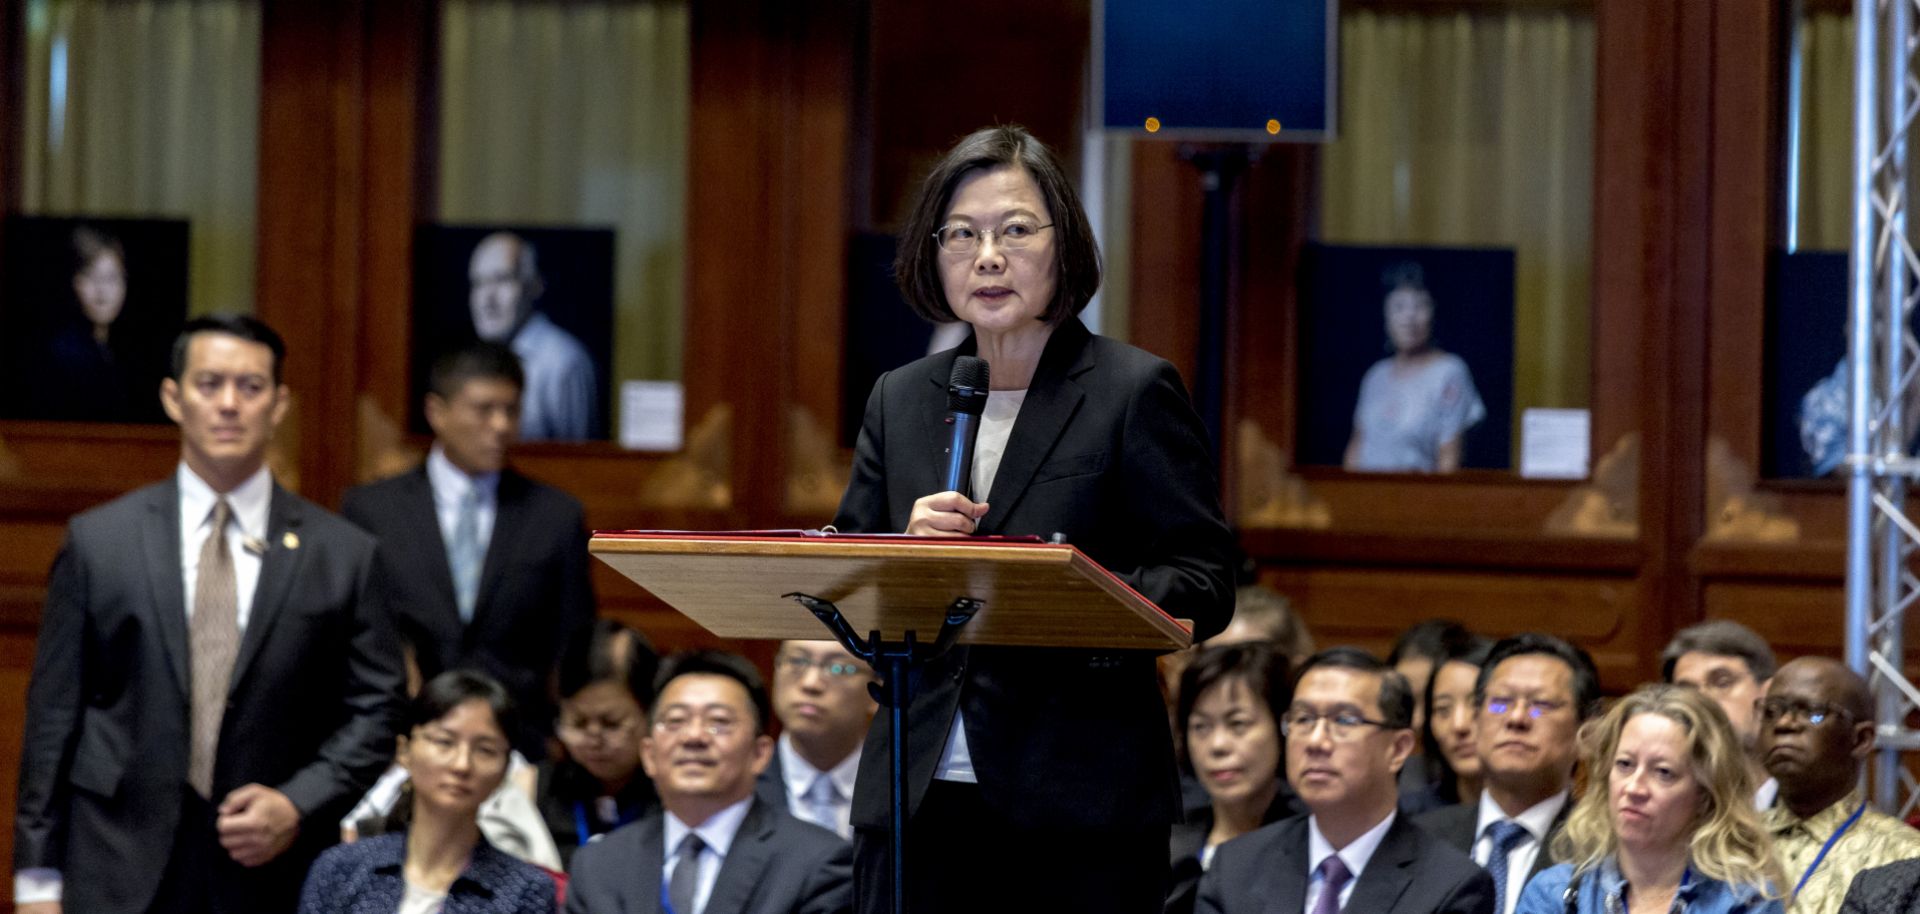 Taiwanese President Tsai Ing-wen speaks during the opening ceremony of the congress of the International Federation of Human Rights in Taipei, Taiwan, on Oct. 21, 2019.